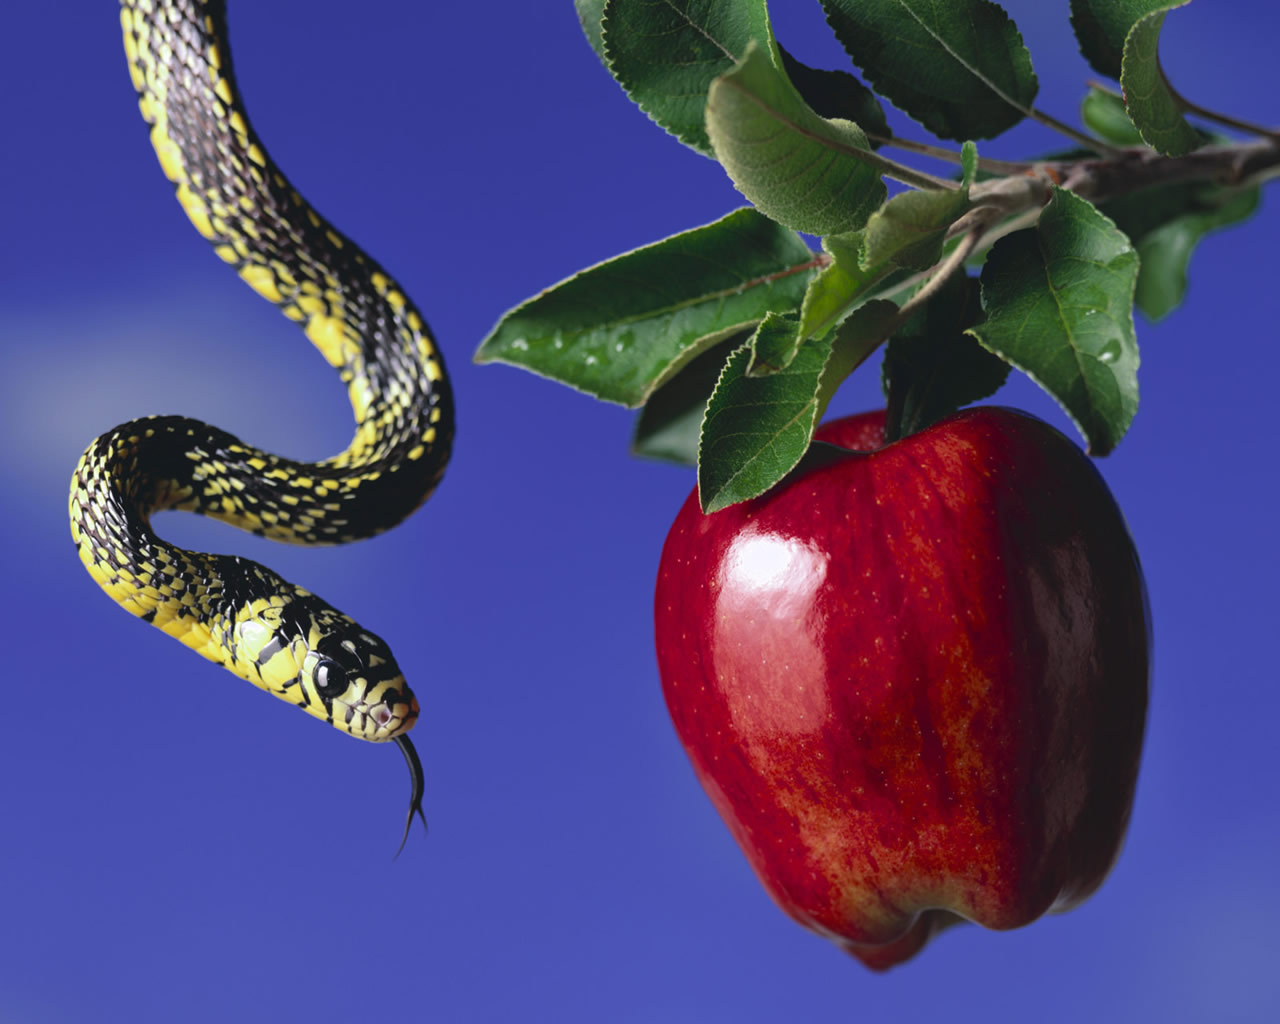 Search For Bible Truths: How Could the Snake in the Garden ...